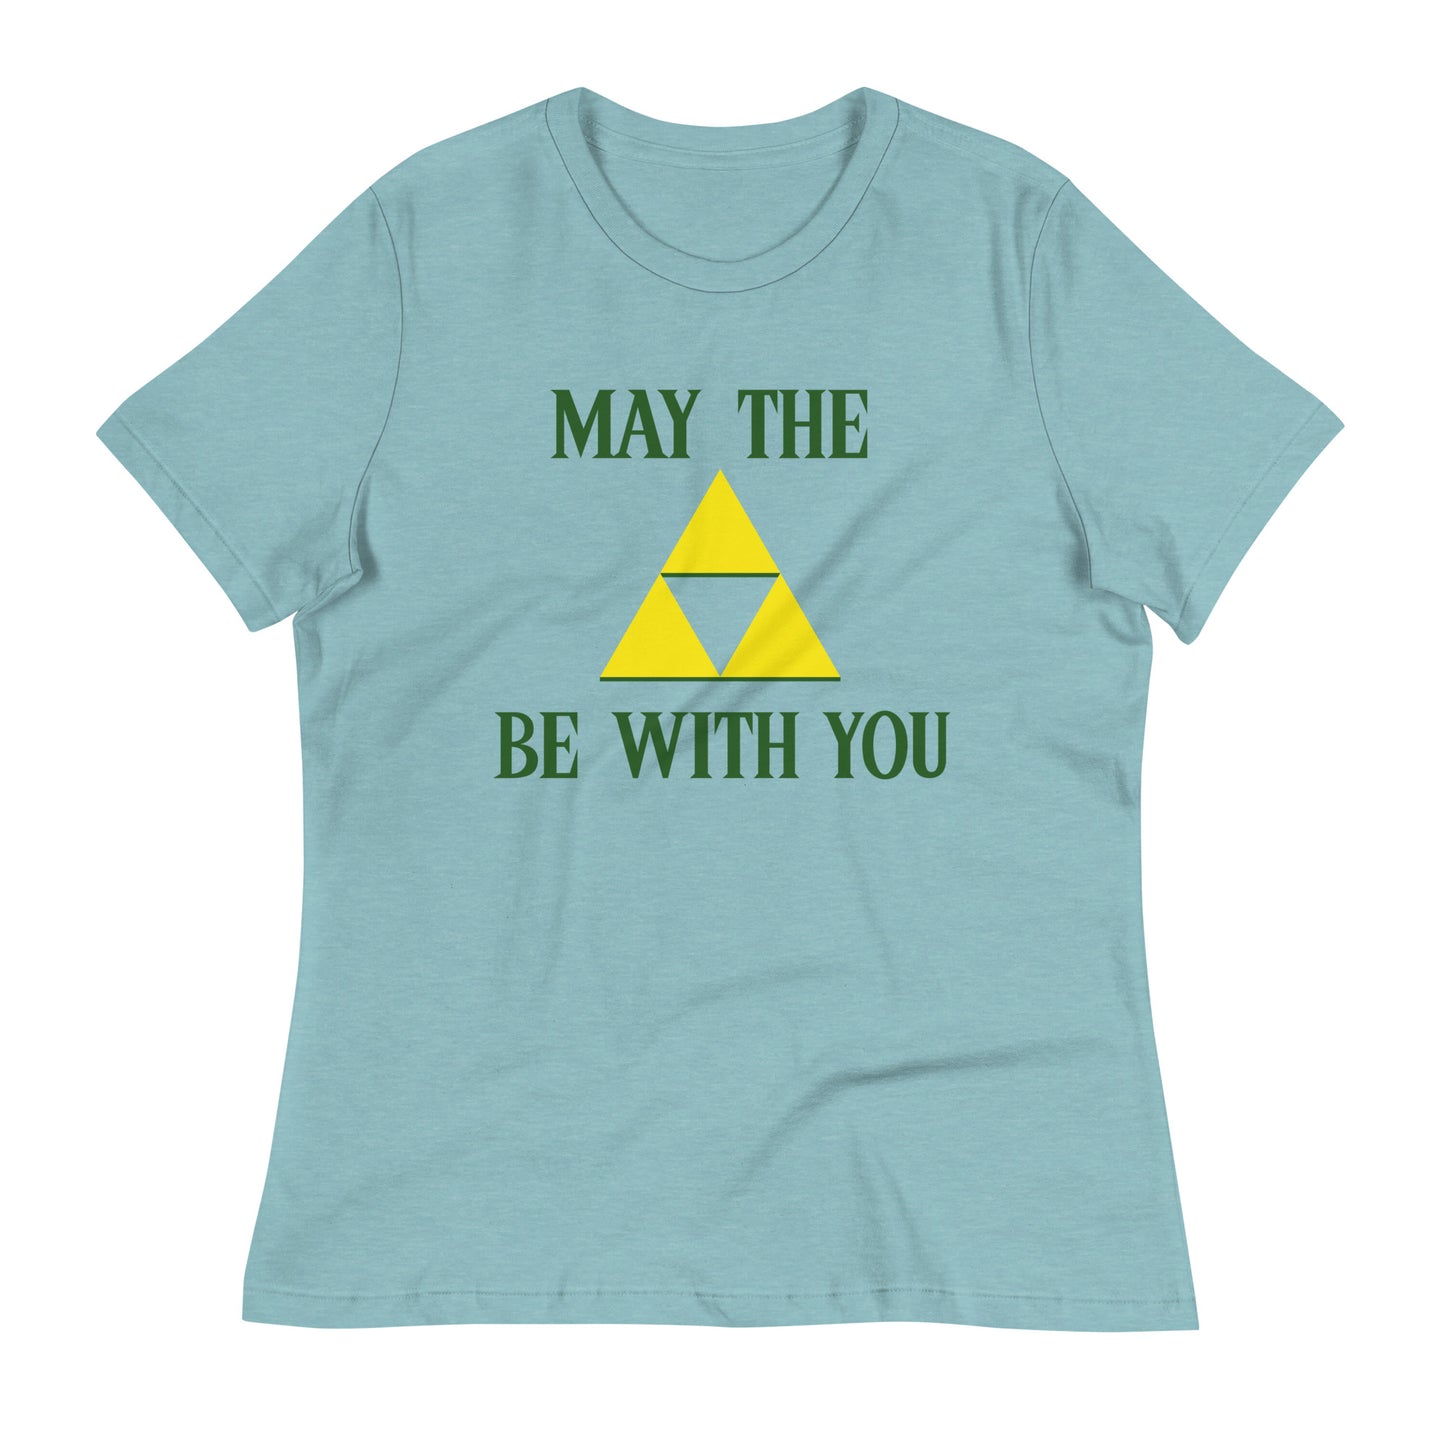 A Link To The Force Women's Signature Tee